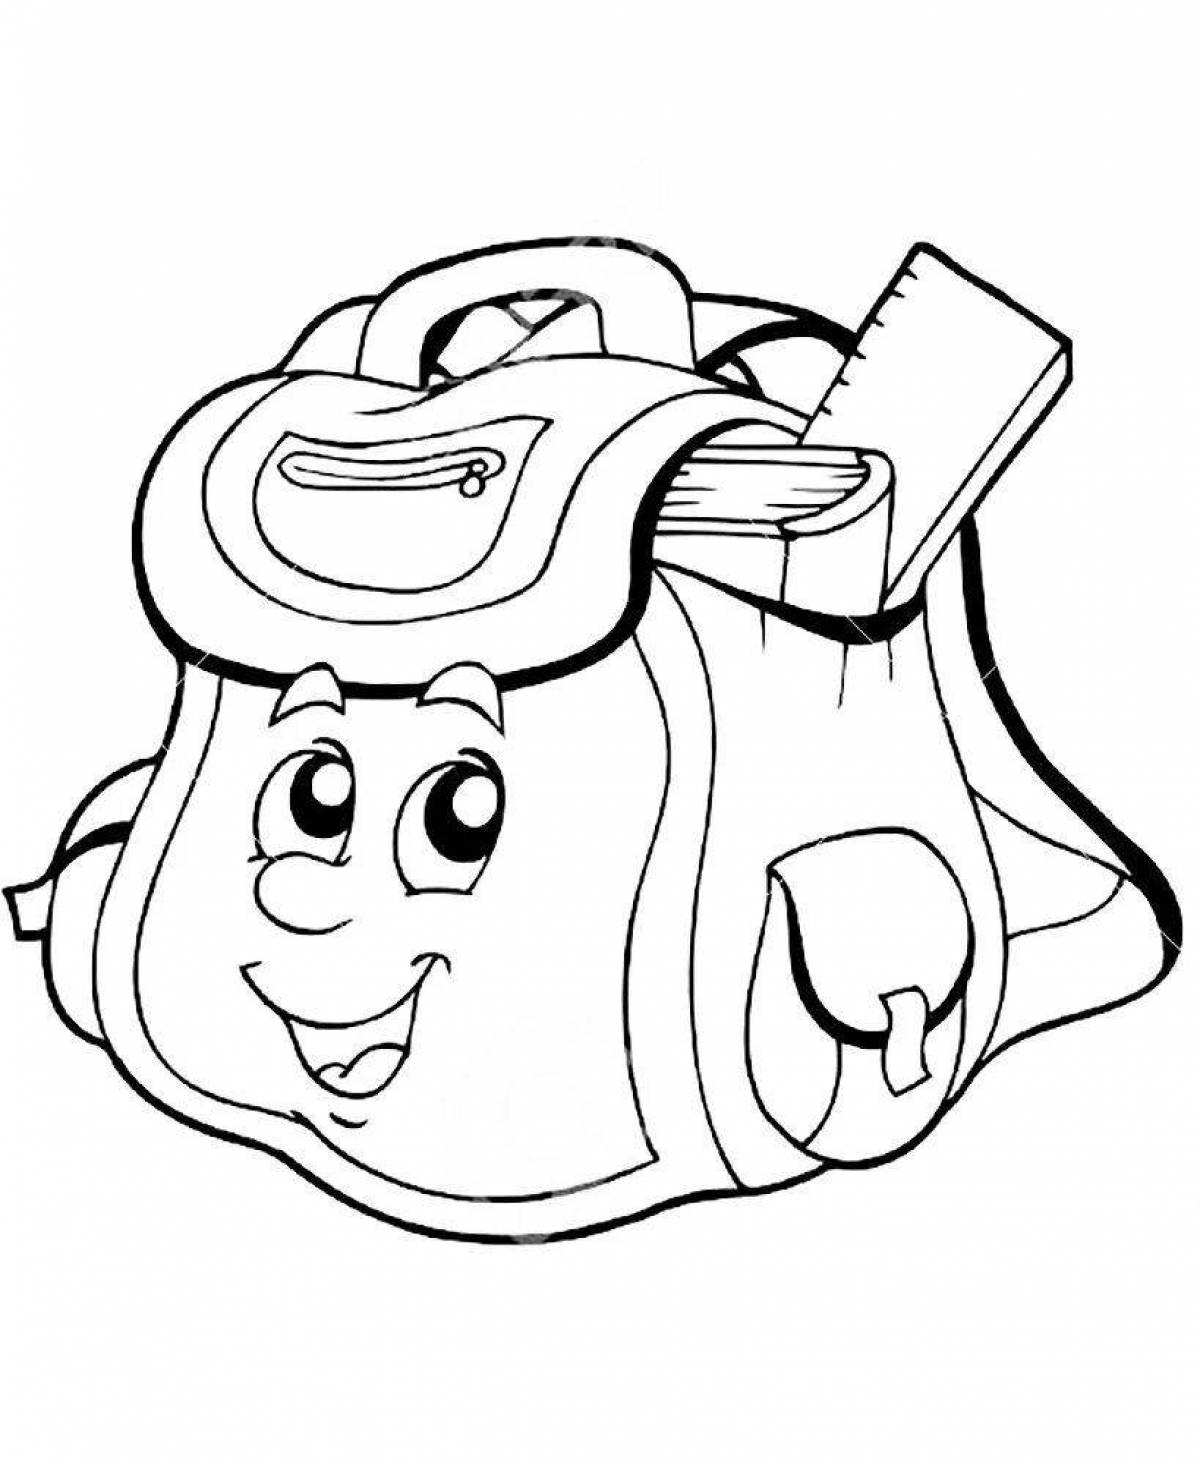 Coloring book cute backpack for kids